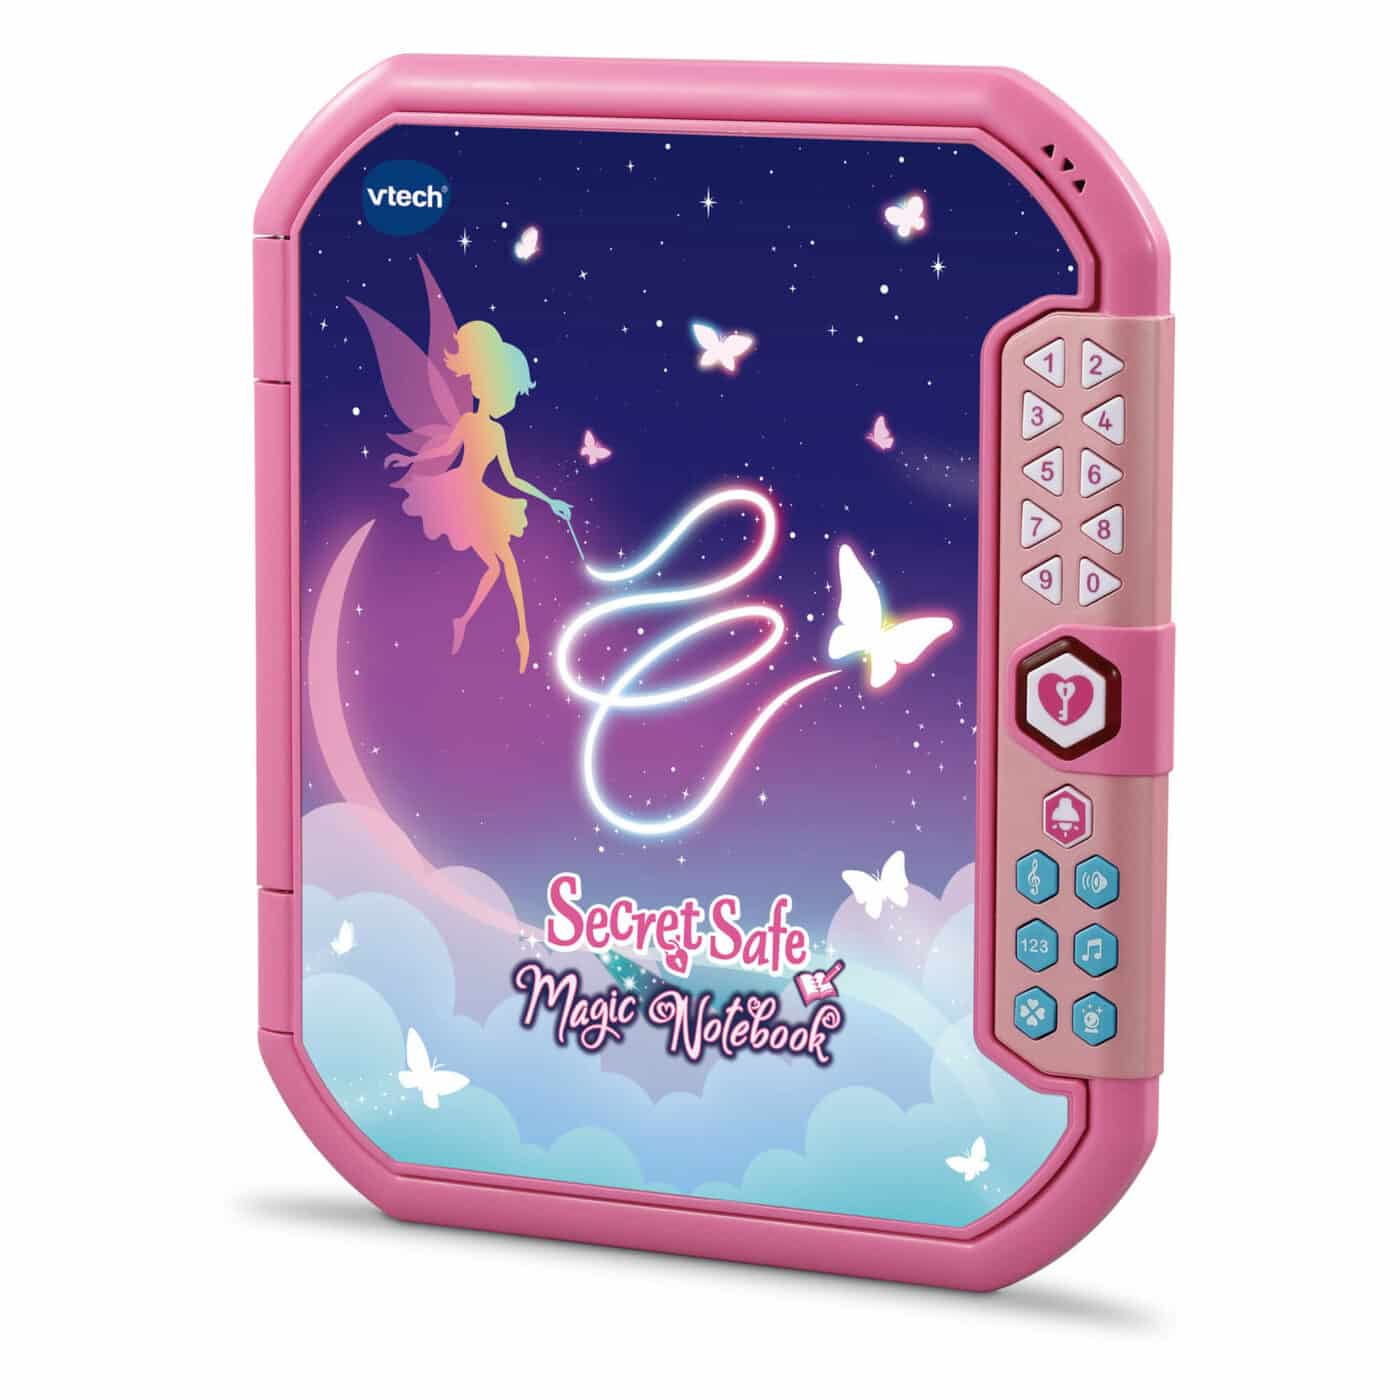 Vtech Secret Safe - Magic Notebook with Invisible Ink Pen1